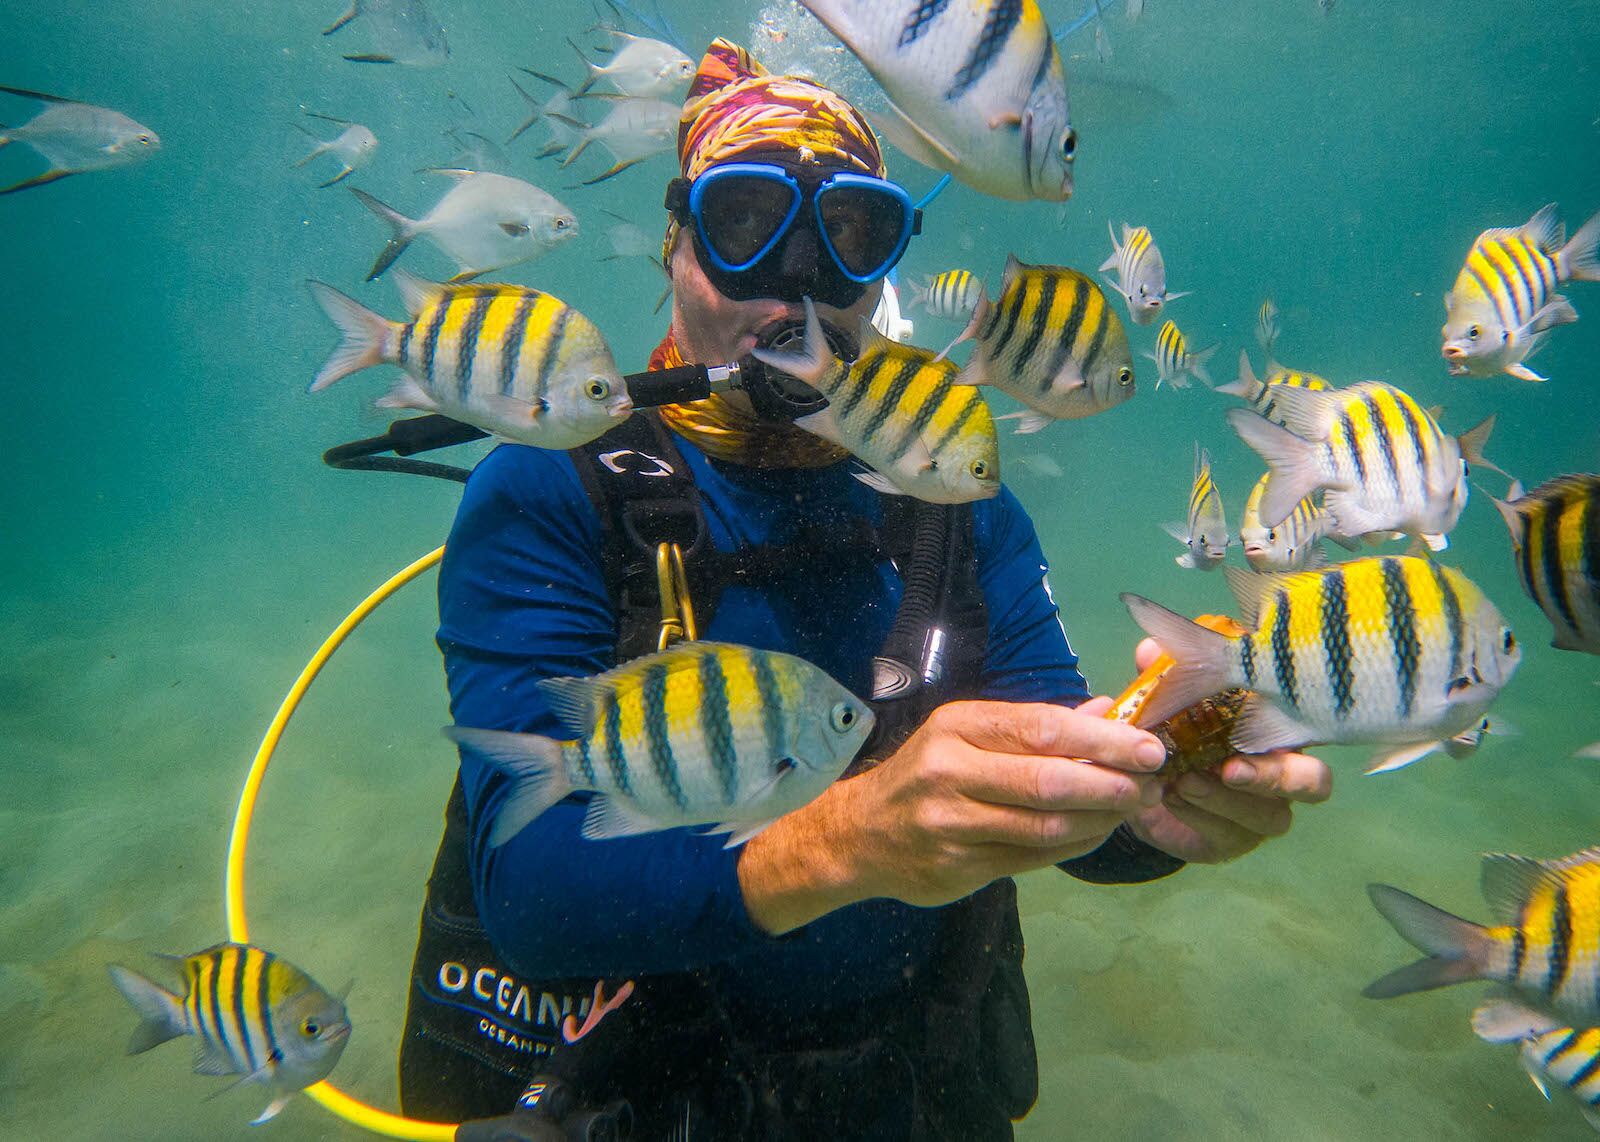 diving underwater at el caribe puerto rico surrounded by fish